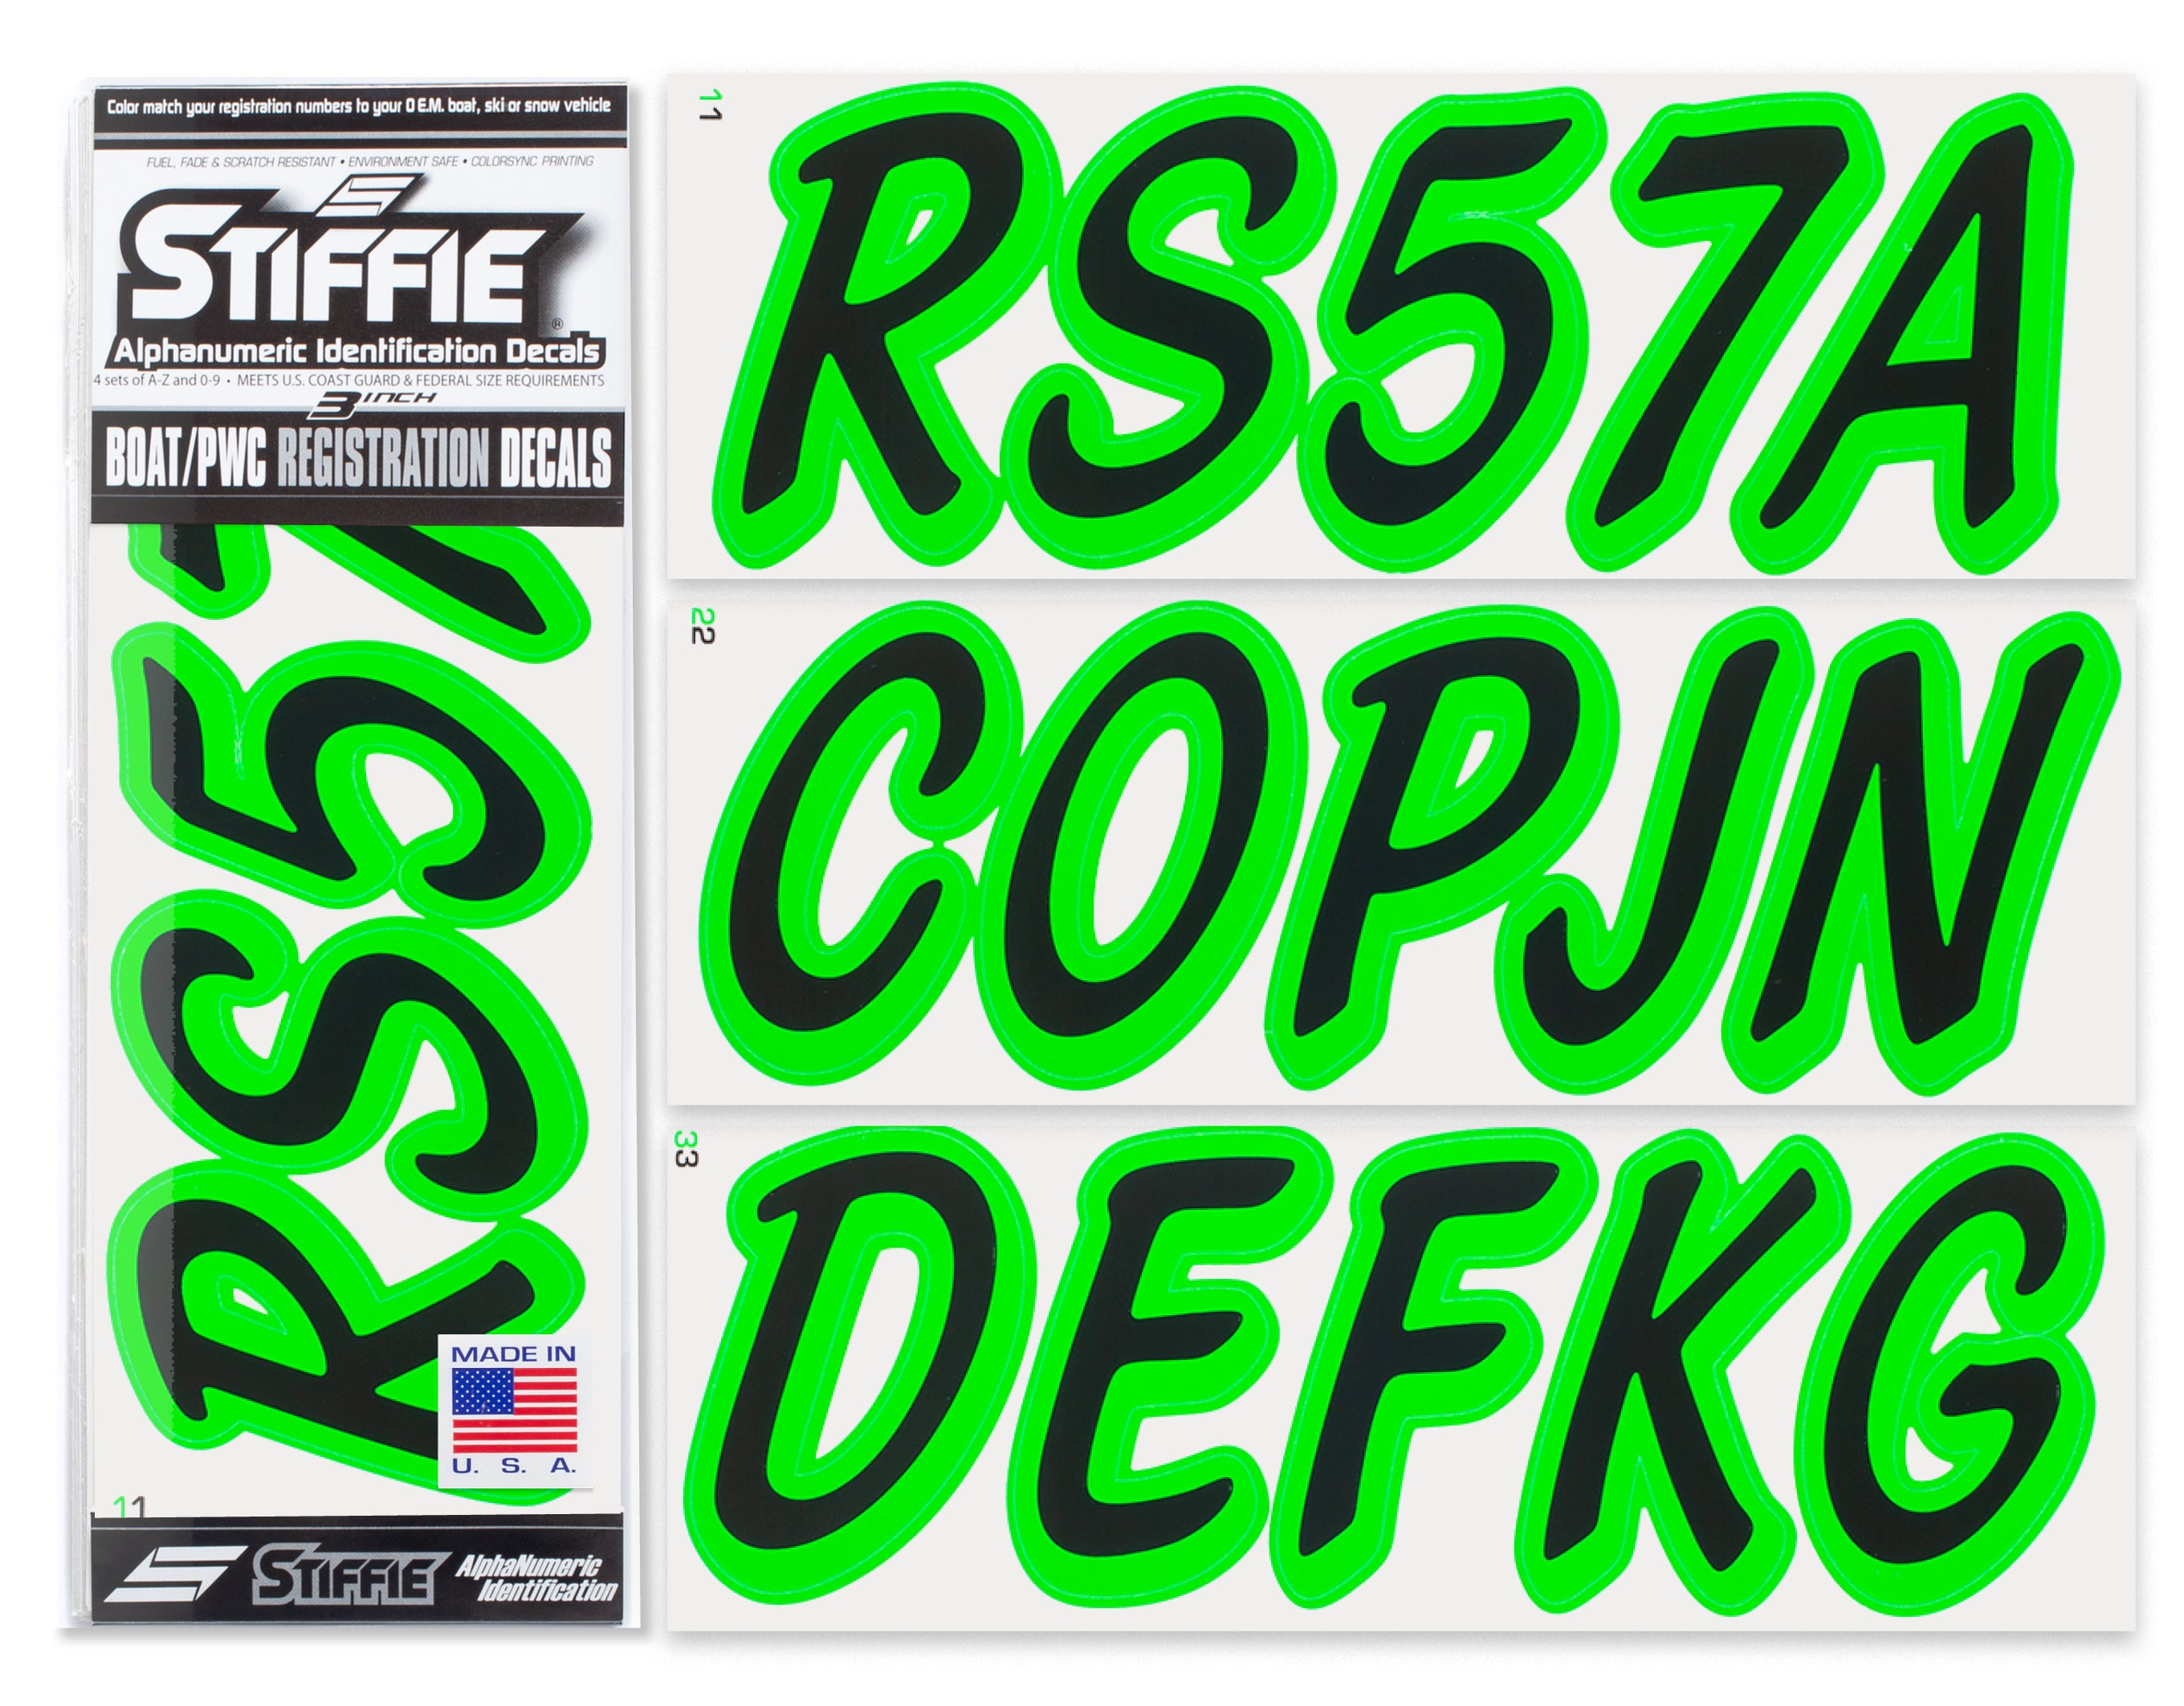 STIFFIE Whipline Solid Black/Electric Green 3" Alpha-Numeric Registration Identification Numbers Stickers Decals for Boats & Personal Watercraft